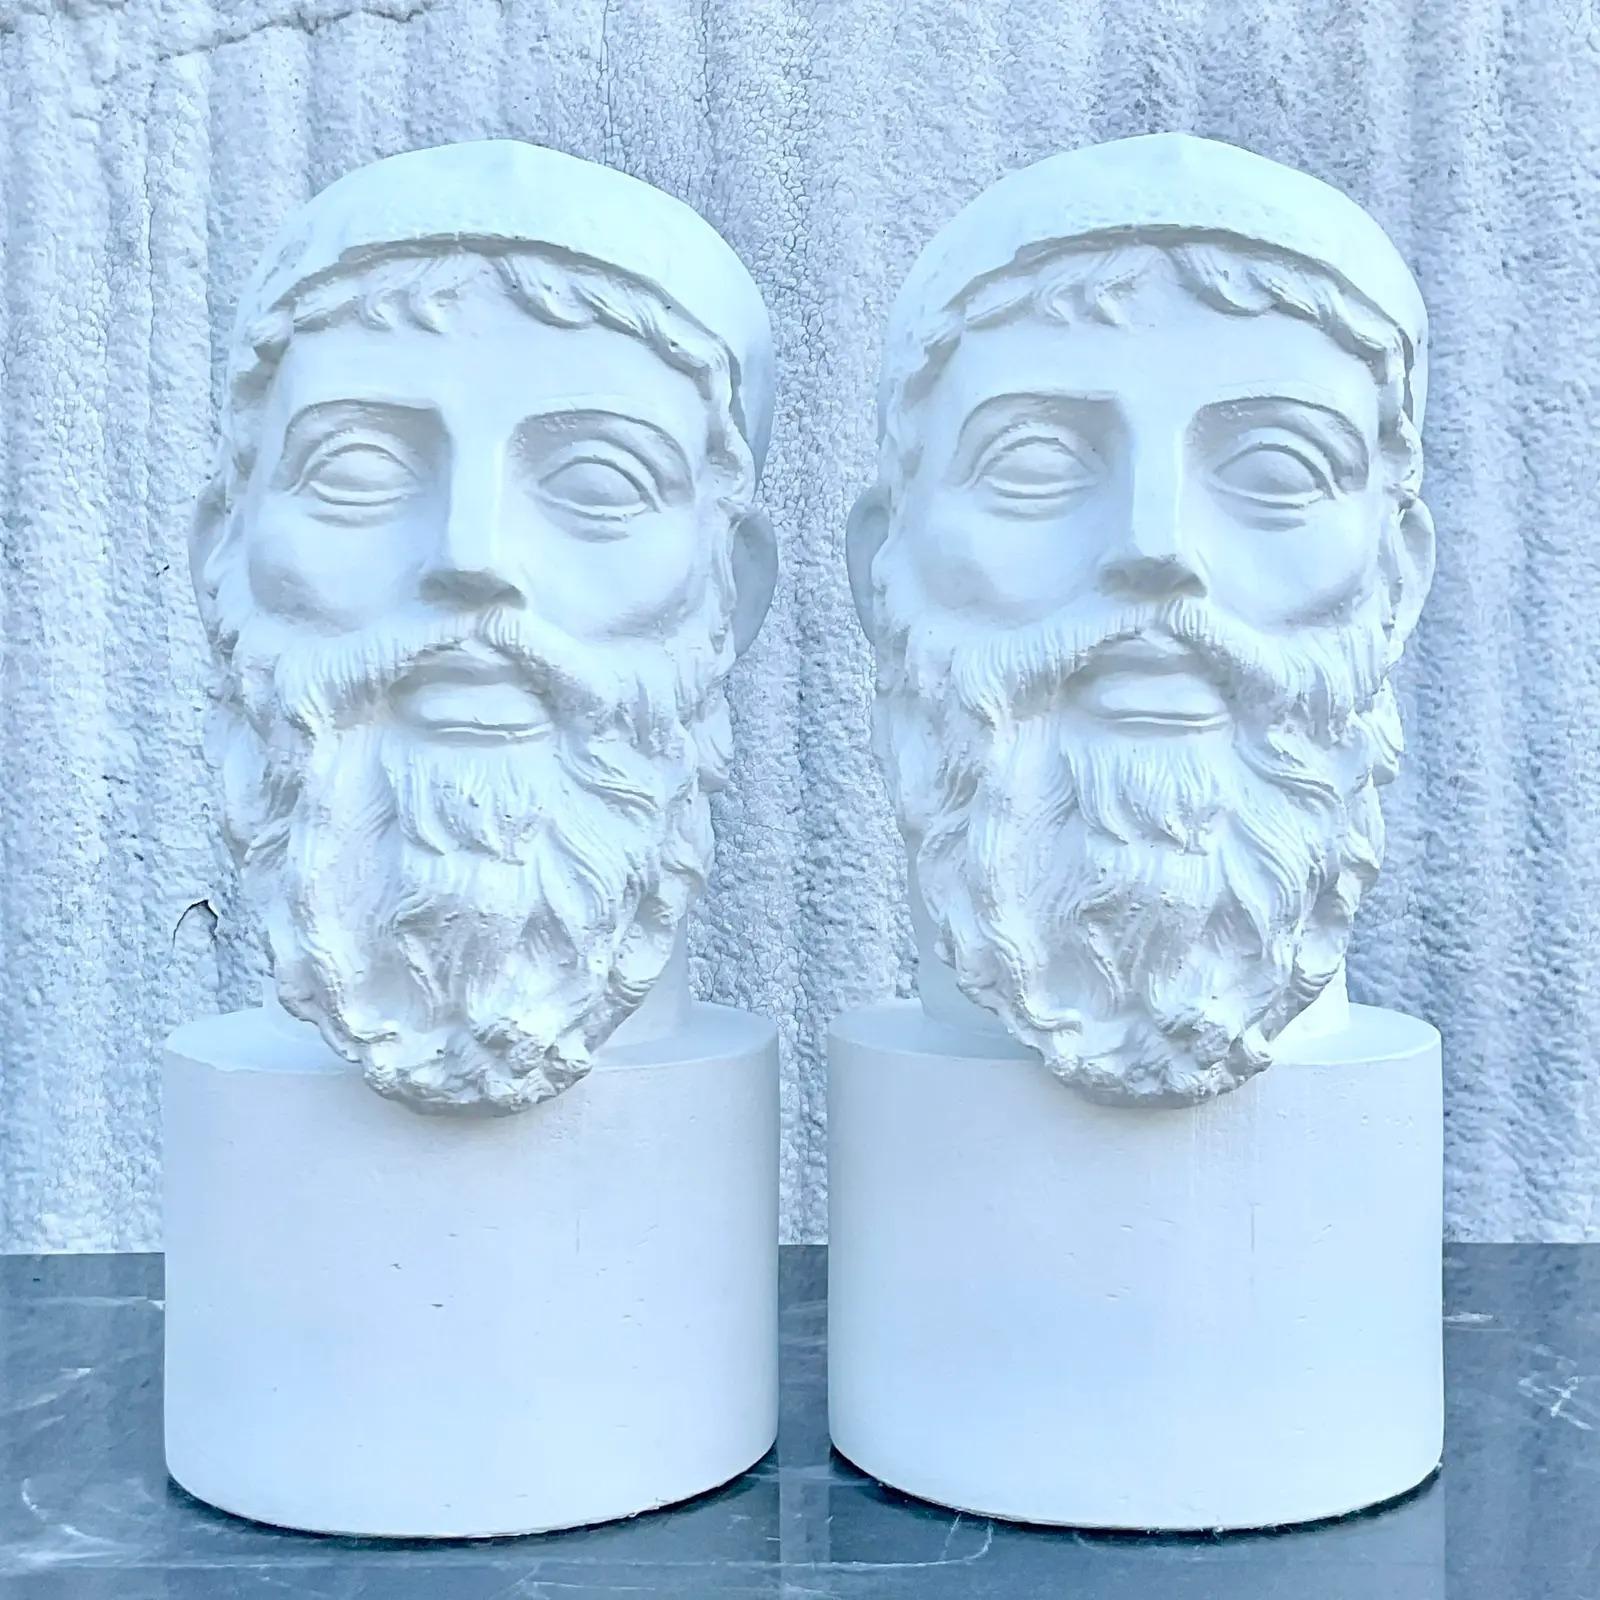 A fabulous pair of vintage plaster busts. A handsome man with an even more handsome beard. Done in the grand tour style. Painted a bright white. Acquired from a Palm Beach estate.